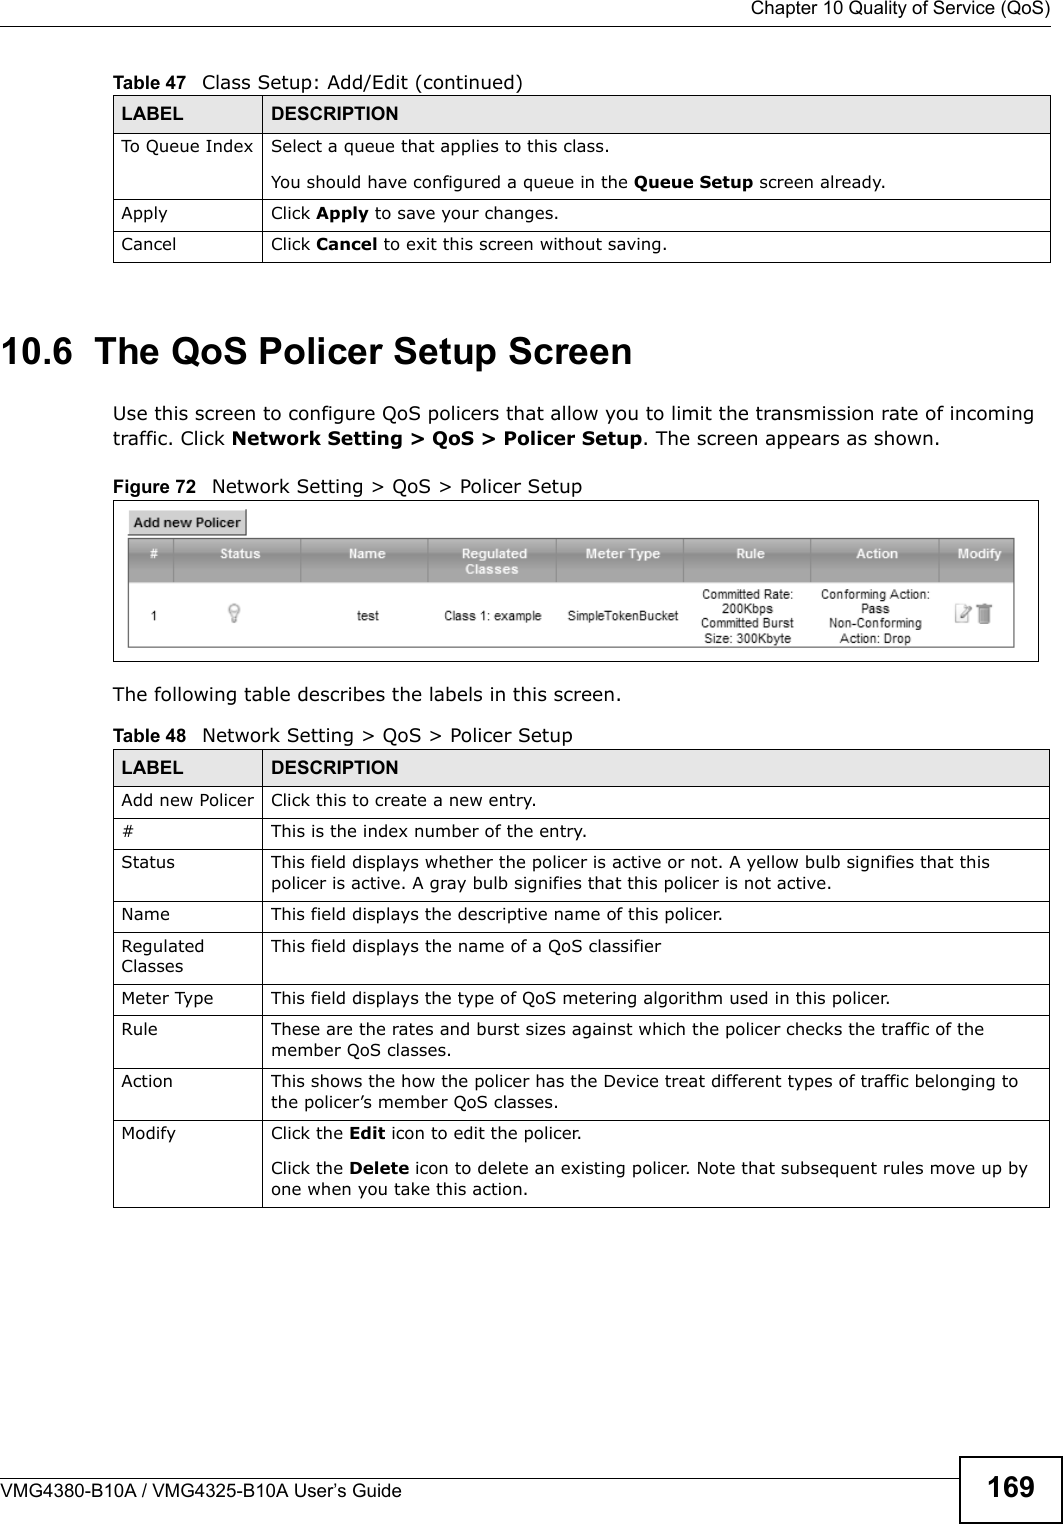  Chapter 10 Quality of Service (QoS)VMG4380-B10A / VMG4325-B10A User’s Guide 16910.6  The QoS Policer Setup ScreenUse this screen to configure QoS policers that allow you to limit the transmission rate of incoming traffic. Click Network Setting &gt; QoS &gt; Policer Setup. The screen appears as shown. Figure 72   Network Setting &gt; QoS &gt; Policer Setup The following table describes the labels in this screen.  To Queue Index Select a queue that applies to this class.You should have configured a queue in the Queue Setup screen already.Apply Click Apply to save your changes.Cancel Click Cancel to exit this screen without saving.Table 47   Class Setup: Add/Edit (continued)LABEL DESCRIPTIONTable 48   Network Setting &gt; QoS &gt; Policer SetupLABEL DESCRIPTIONAdd new Policer Click this to create a new entry.# This is the index number of the entry.Status This field displays whether the policer is active or not. A yellow bulb signifies that thispolicer is active. A gray bulb signifies that this policer is not active.Name This field displays the descriptive name of this policer.Regulated ClassesThis field displays the name of a QoS classifierMeter Type This field displays the type of QoS metering algorithm used in this policer.Rule These are the rates and burst sizes against which the policer checks the traffic of the member QoS classes.Action This shows the how the policer has the Device treat different types of traffic belonging to the policer’s member QoS classes.Modify Click the Edit icon to edit the policer.Click the Delete icon to delete an existing policer. Note that subsequent rules move up byone when you take this action.